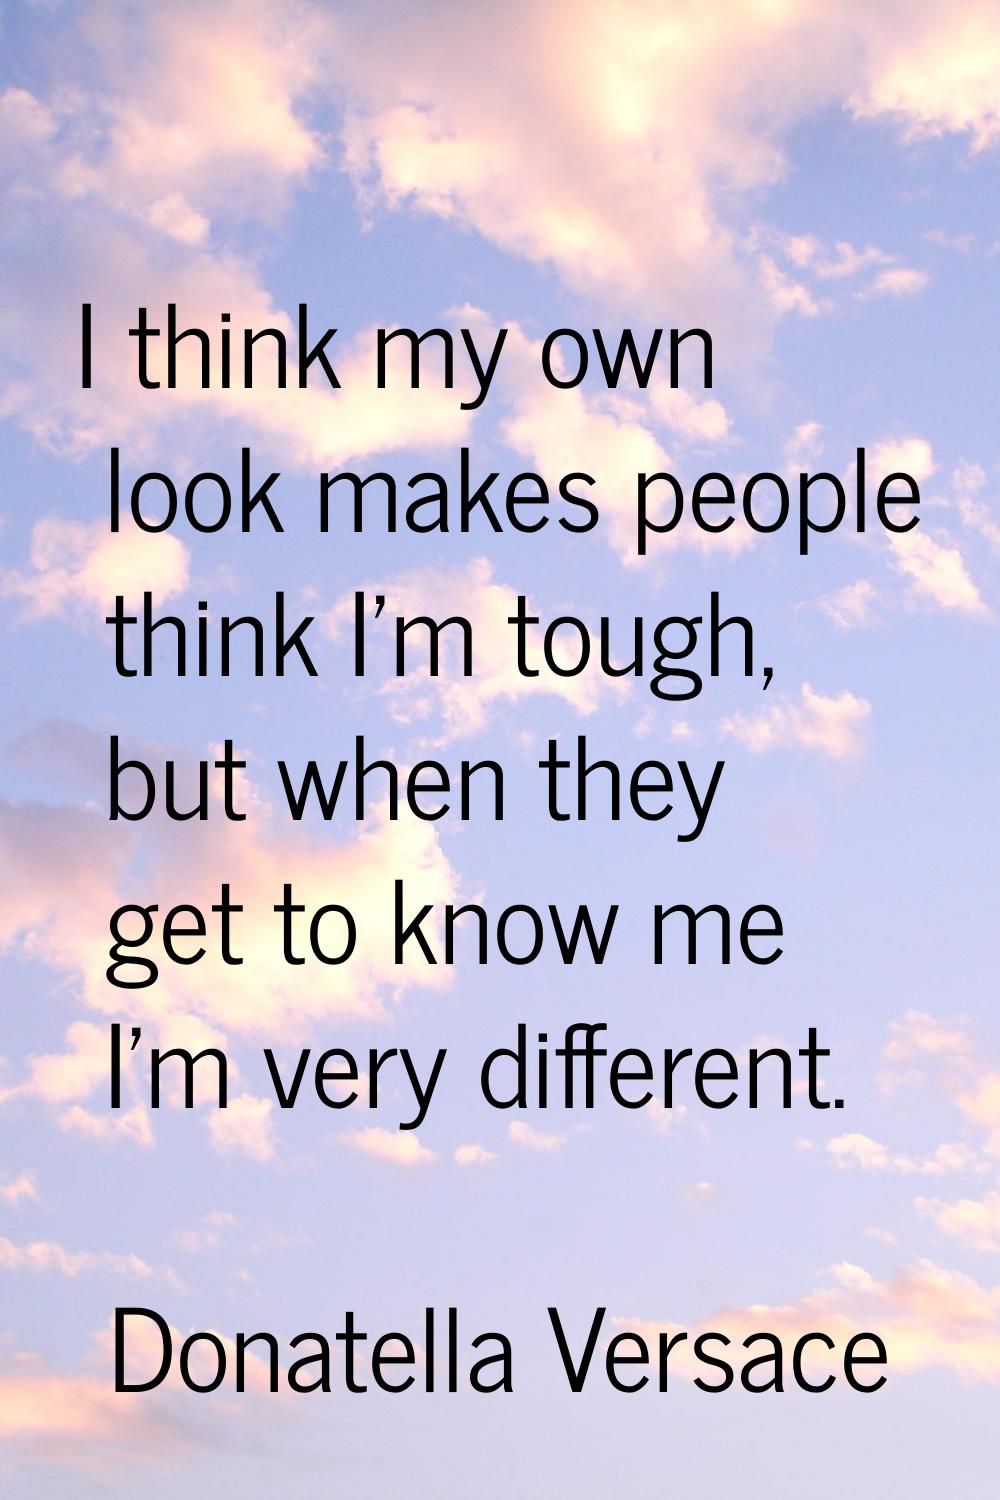 I think my own look makes people think I'm tough, but when they get to know me I'm very different.